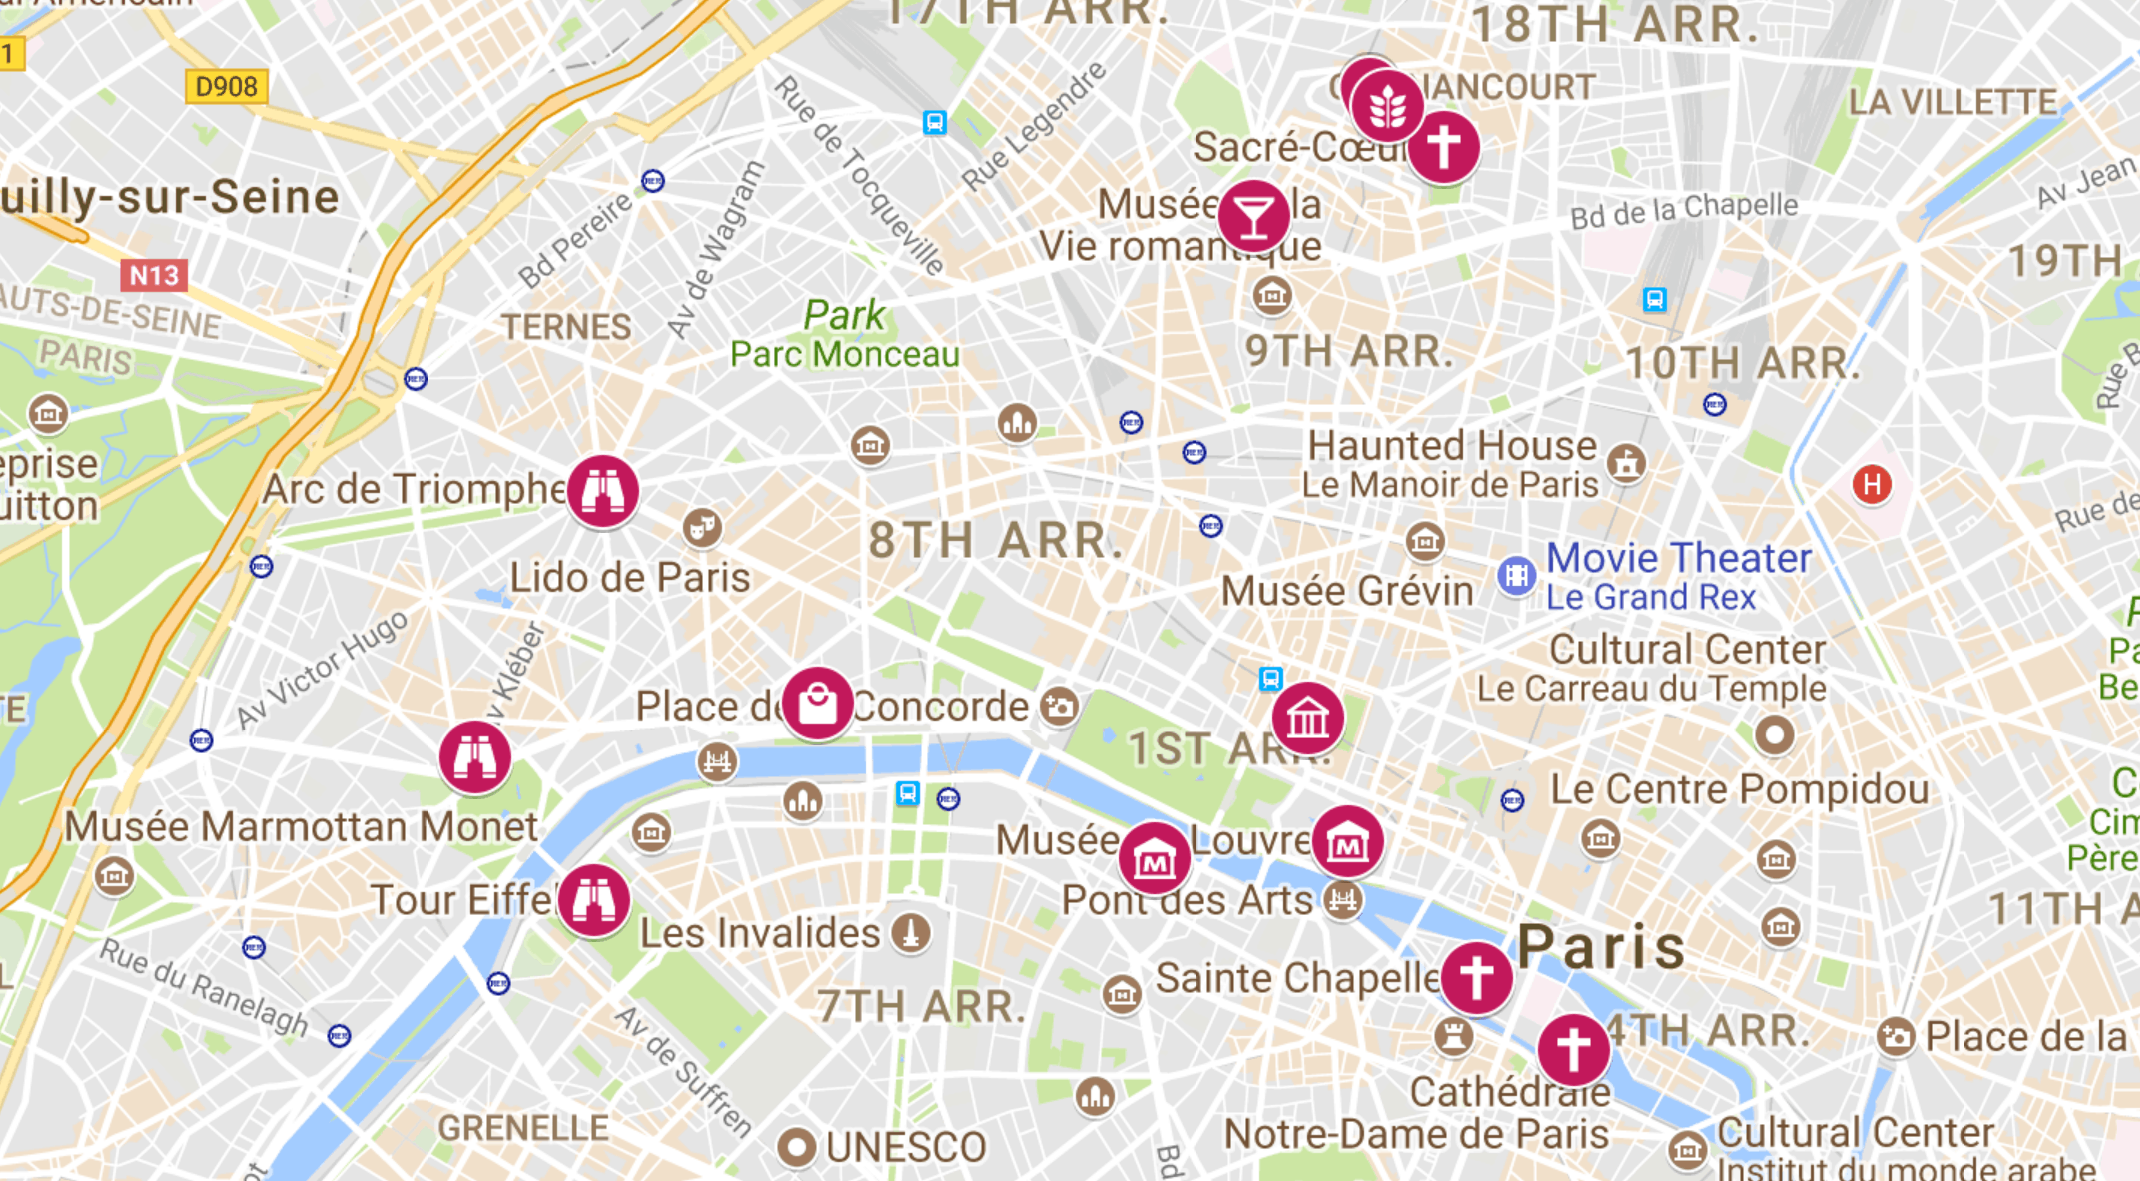 detailed map of paris itinerary stops